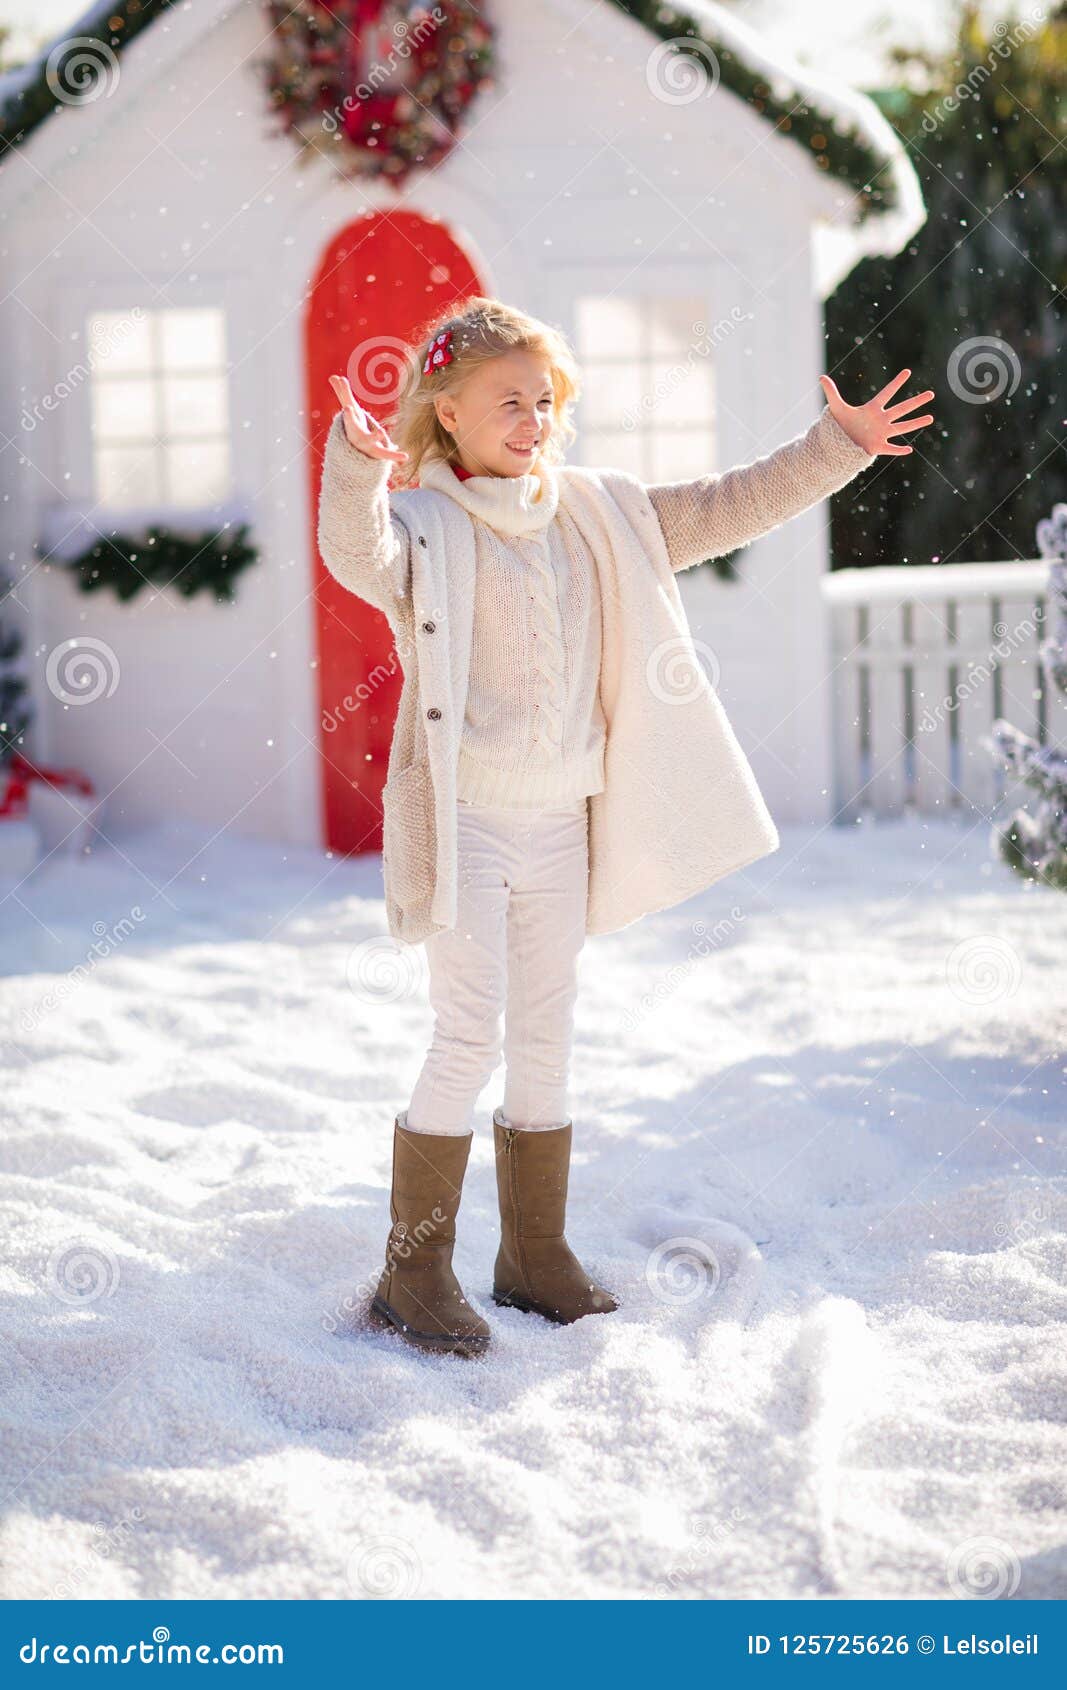 Cute Blonde Girl Playing With Snow Near The Small House And Snow